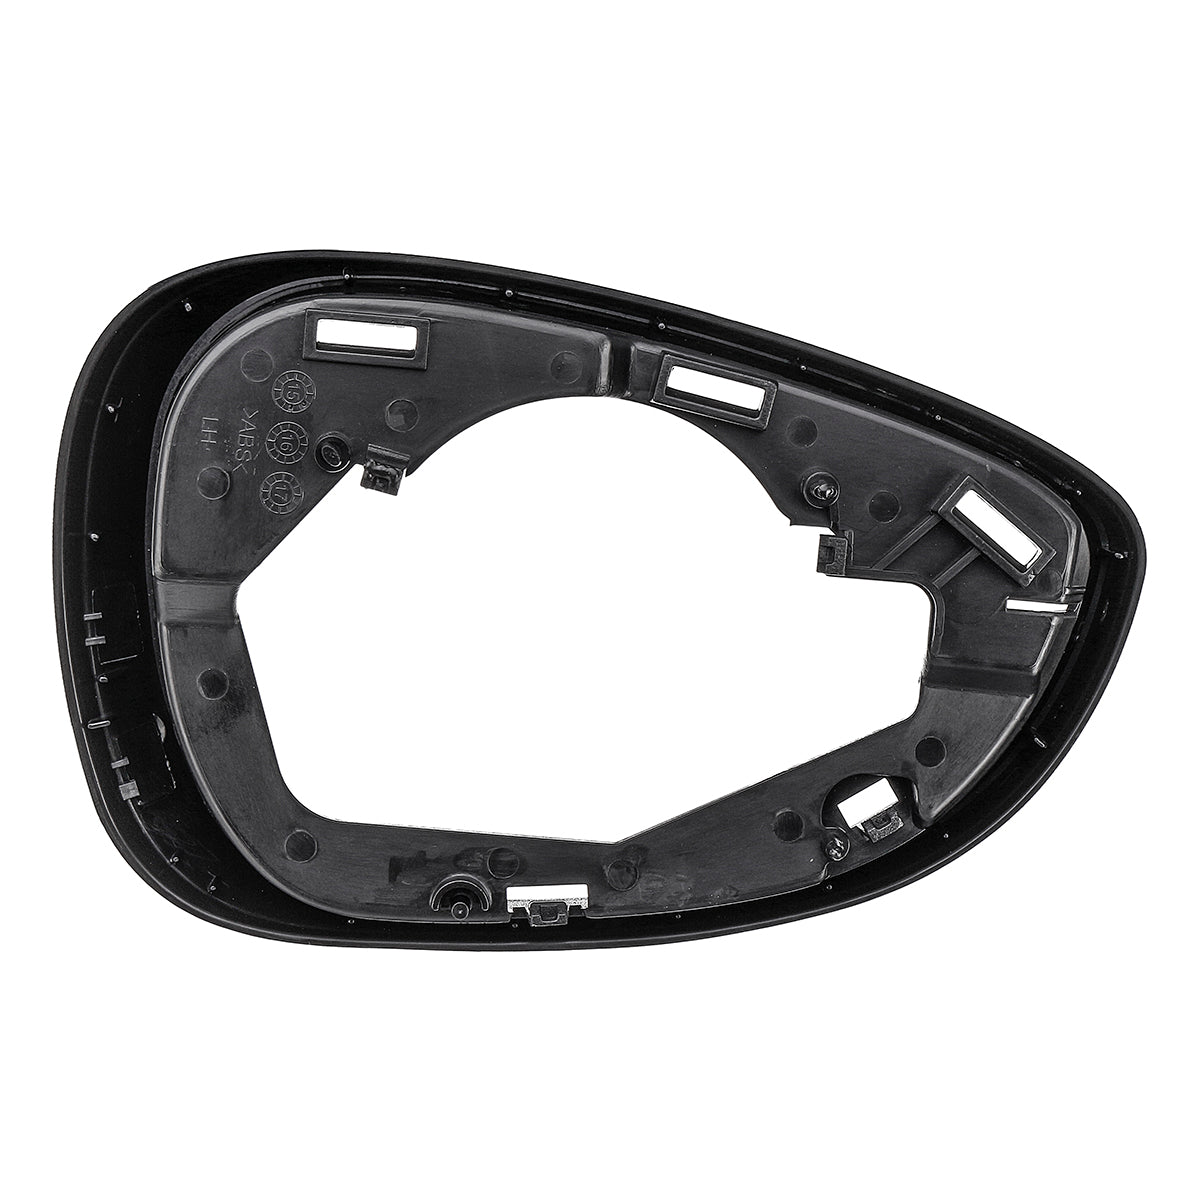 Car Left Right Side Rear View Mirror Cover Frame For Ford Fiesta MK7 09-17 - Auto GoShop